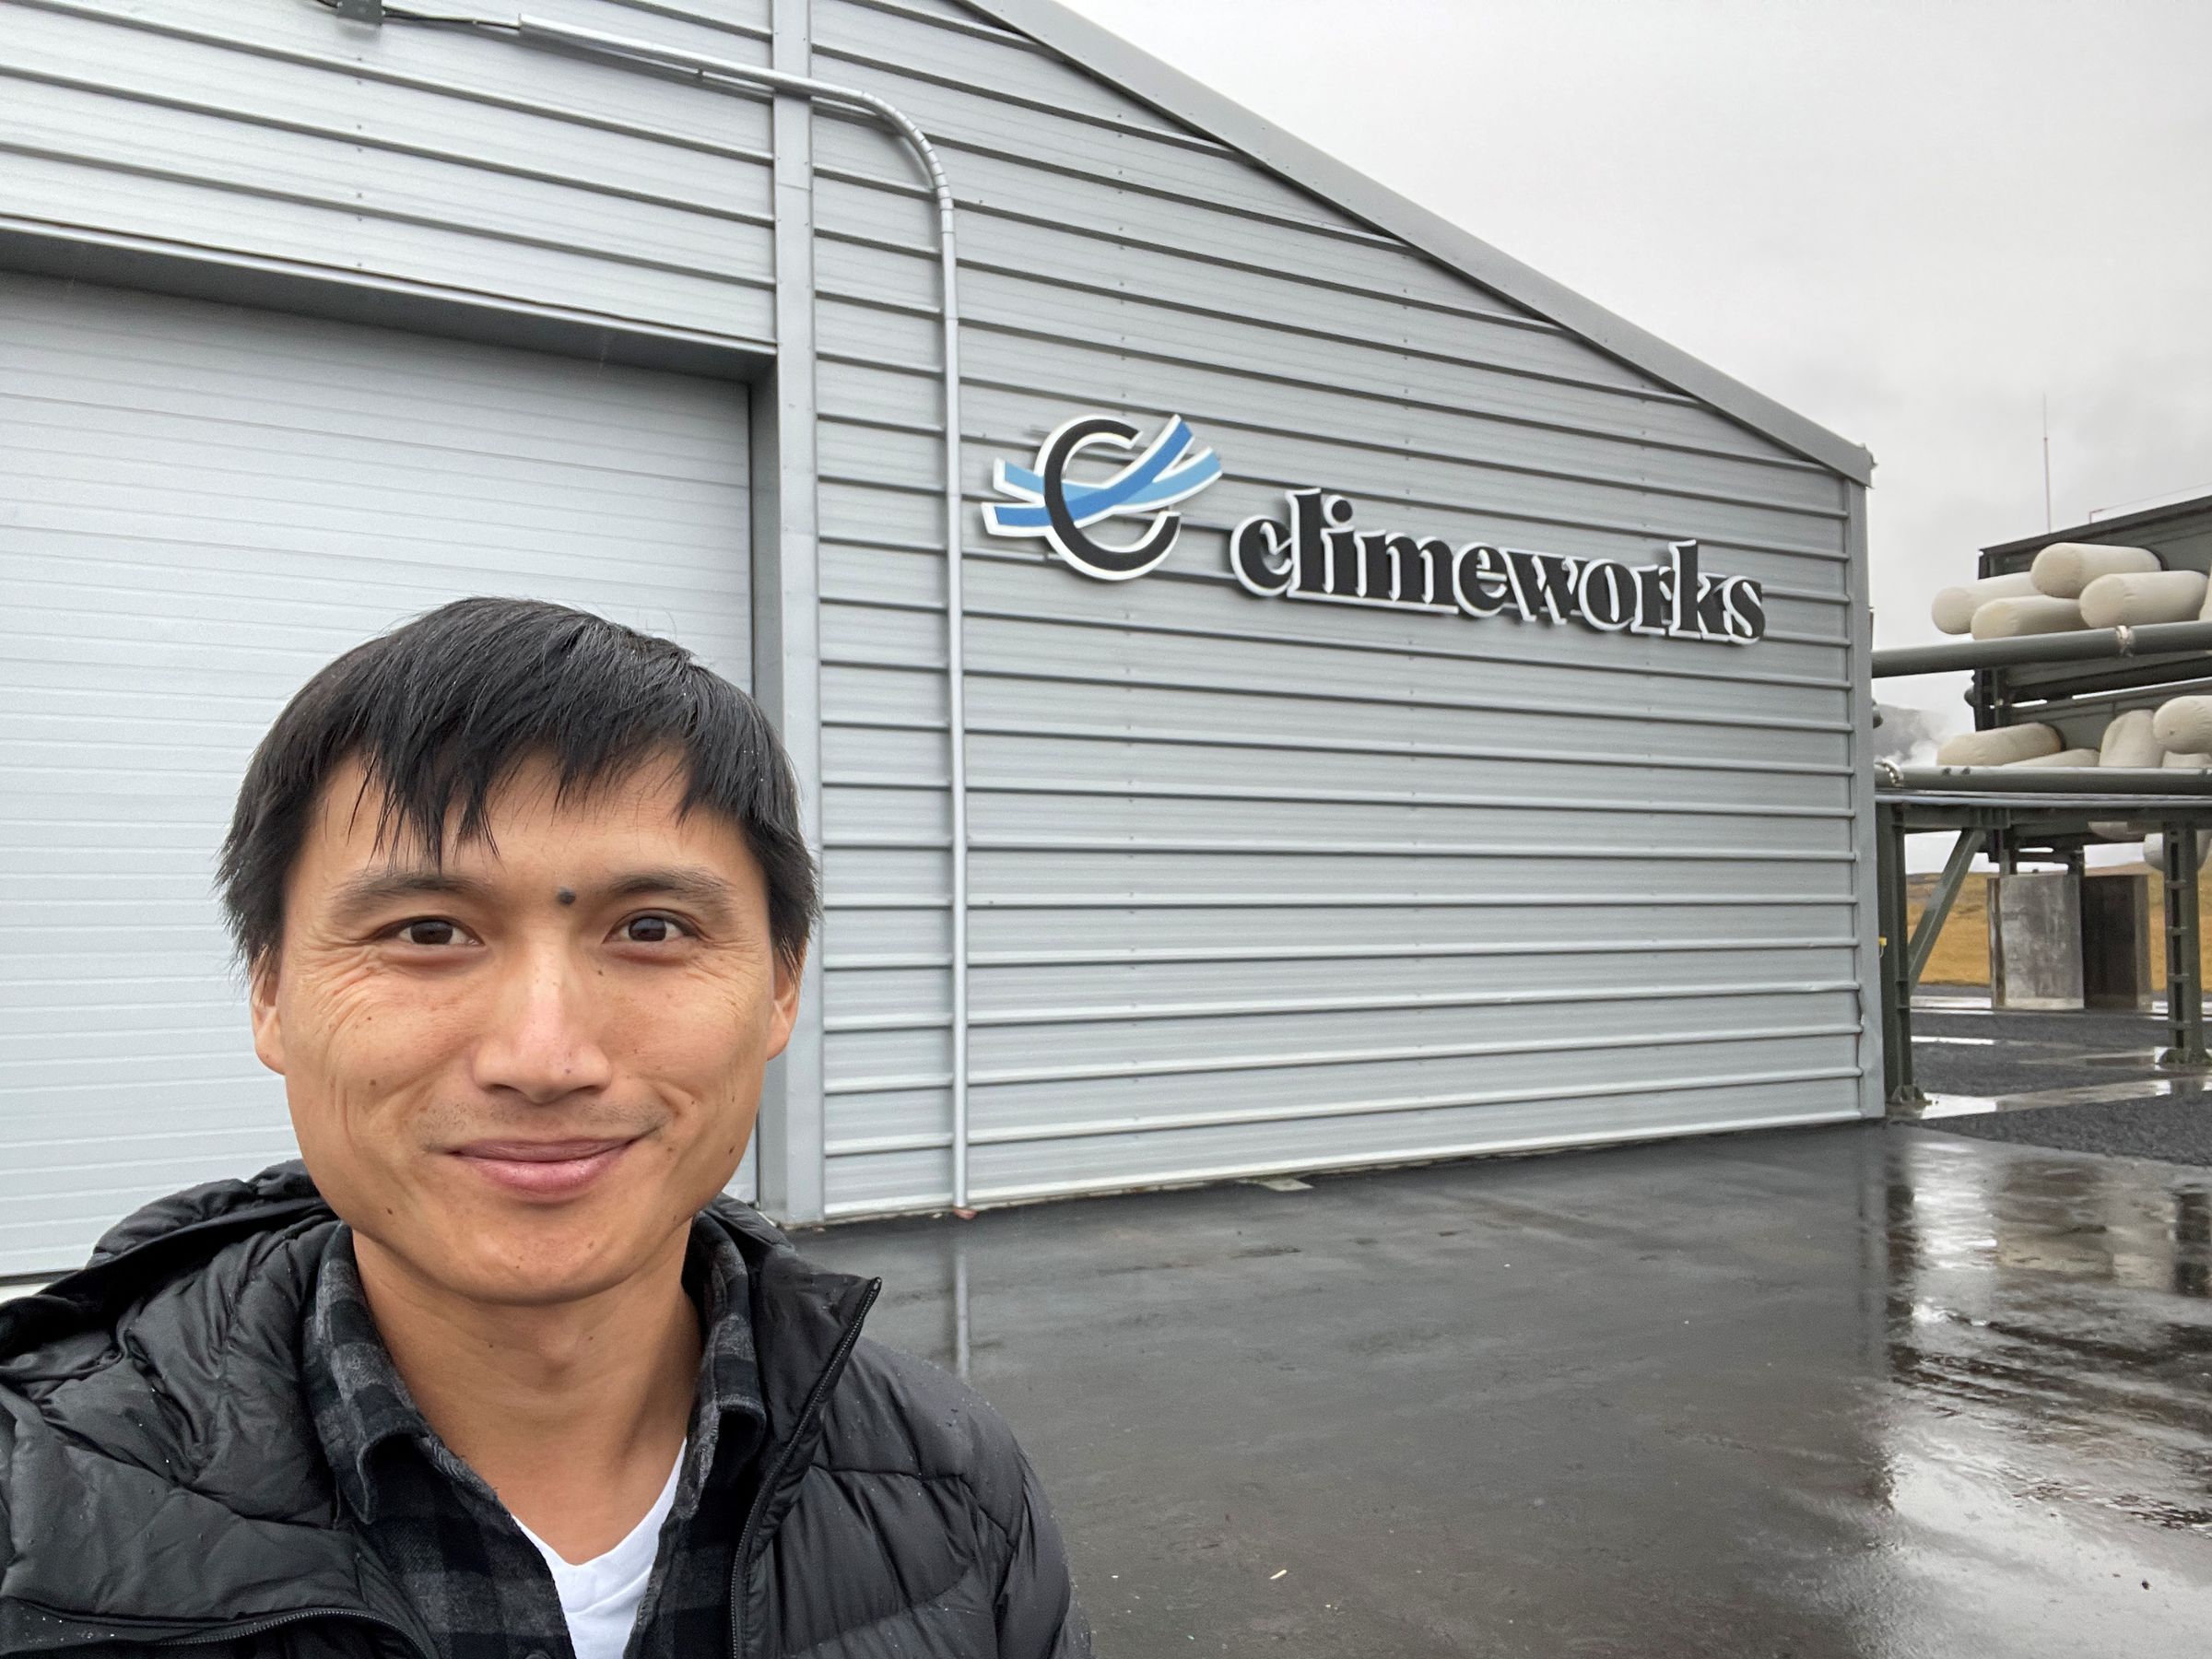 Chan stands in front of a building that says “Climeworks.”